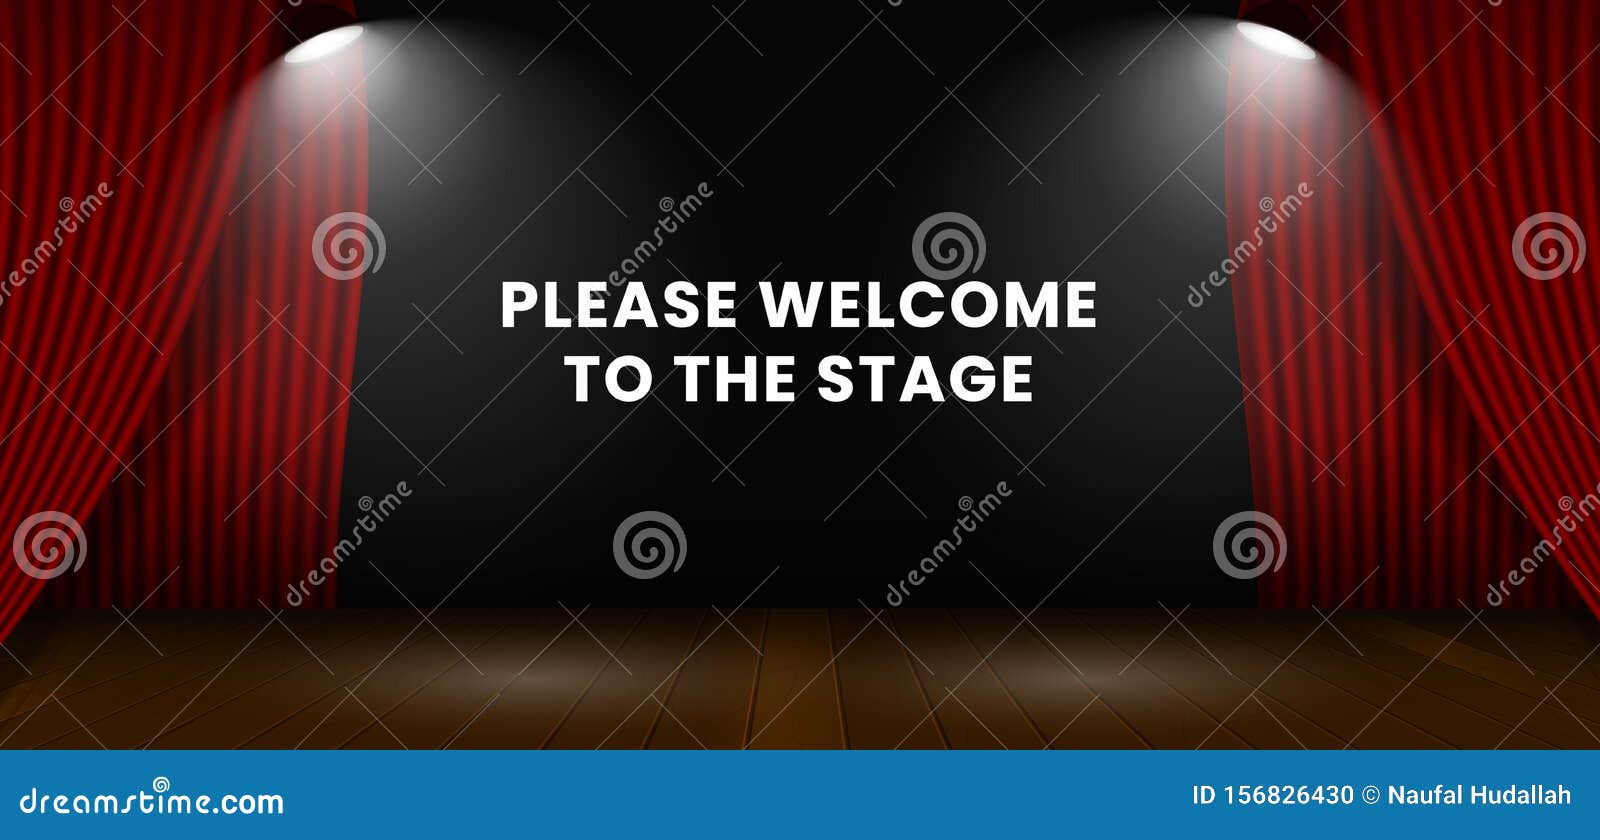 Please Welcome To the Stage Background Design. Open Red Theater Stage  Curtain with Wooden Floor Base and Double Bright Spotlight Stock  Illustration - Illustration of background, lamp: 156826430